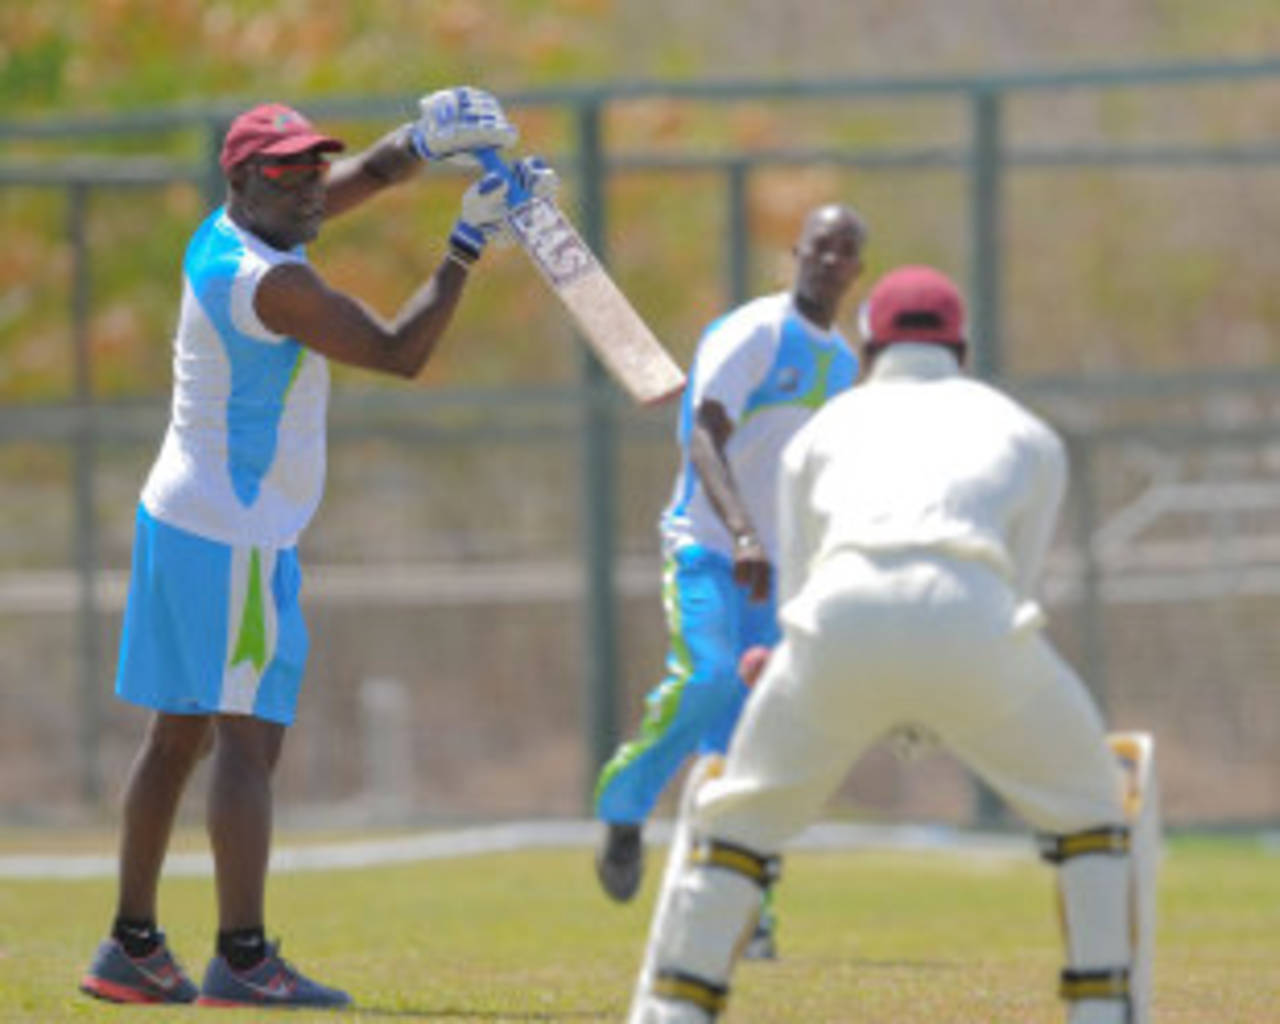 The likes of Viv Richards have played a part in the recent success of some West Indian batsmen&nbsp;&nbsp;&bull;&nbsp;&nbsp;West Indies Cricket